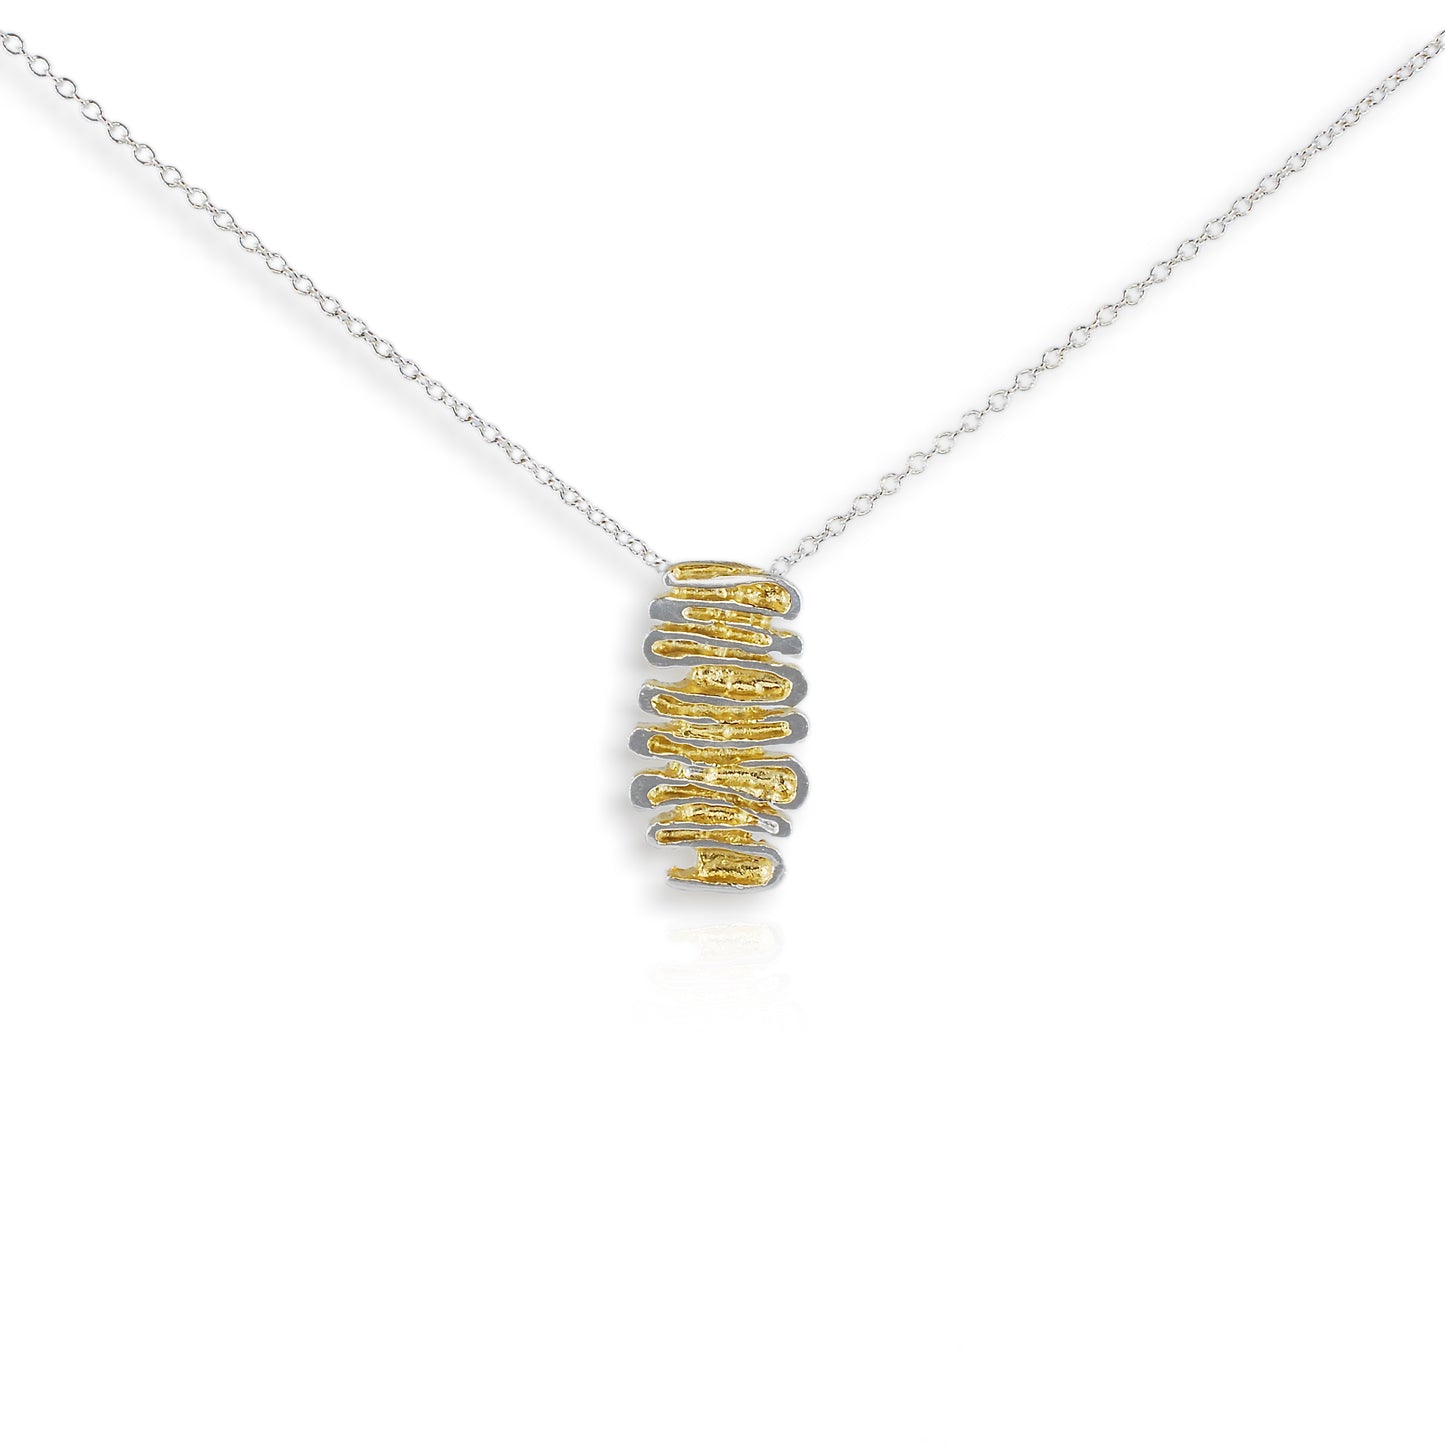 Shore Silver & Gold Plated Pendant